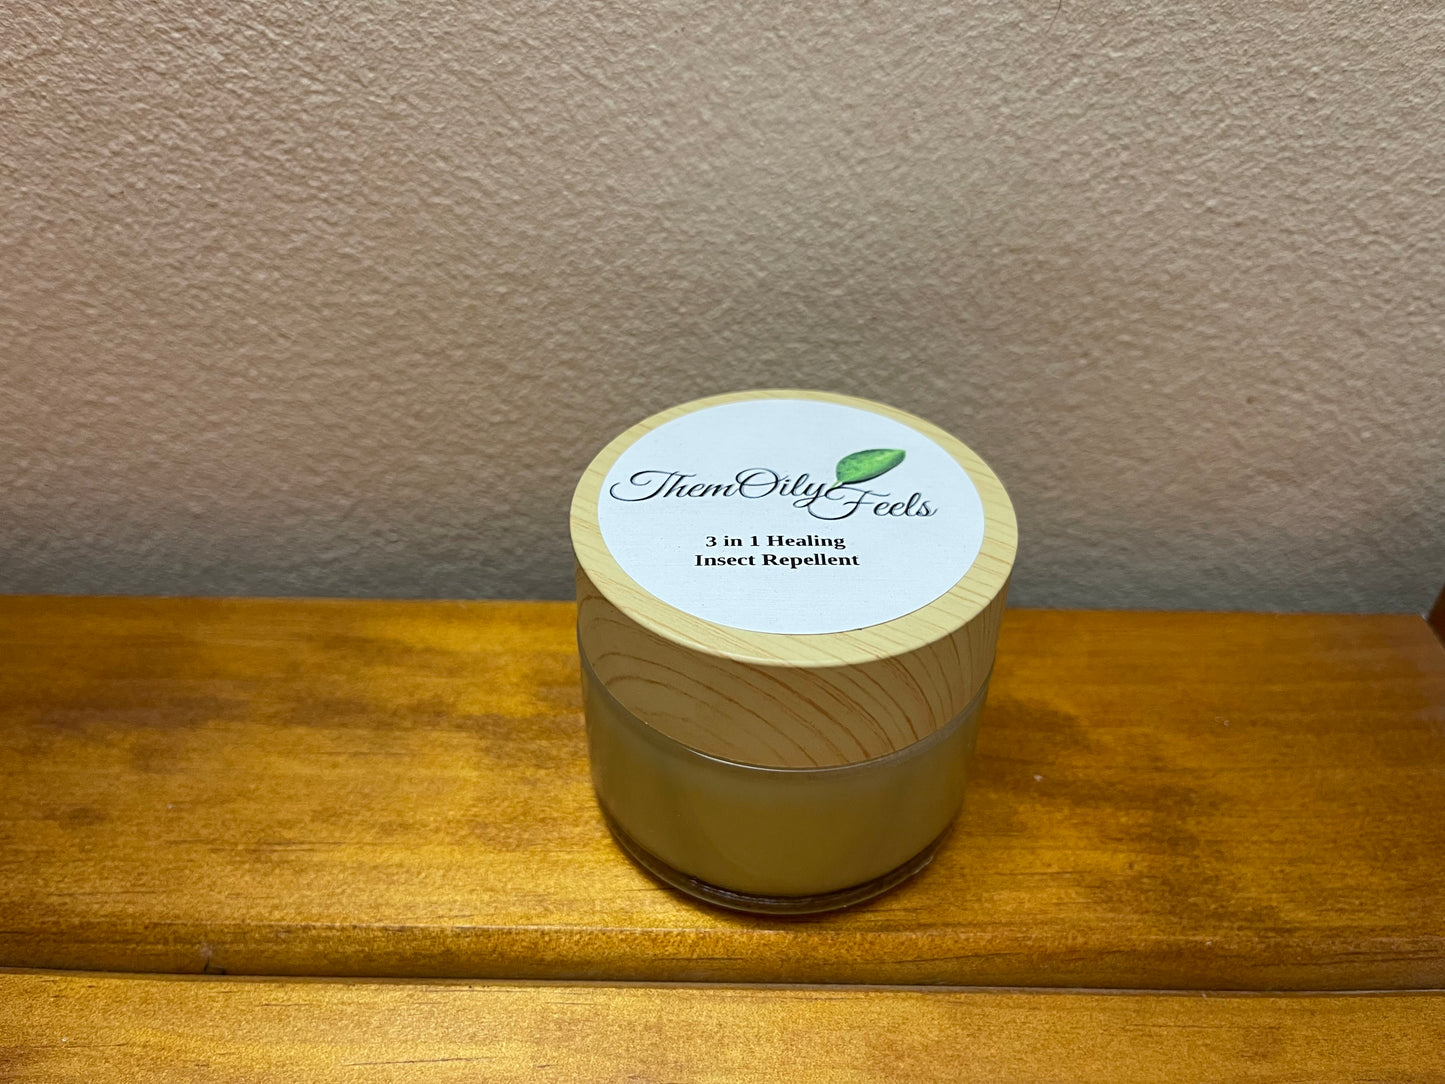 3 in 1 Healing Insect Repellent Balm